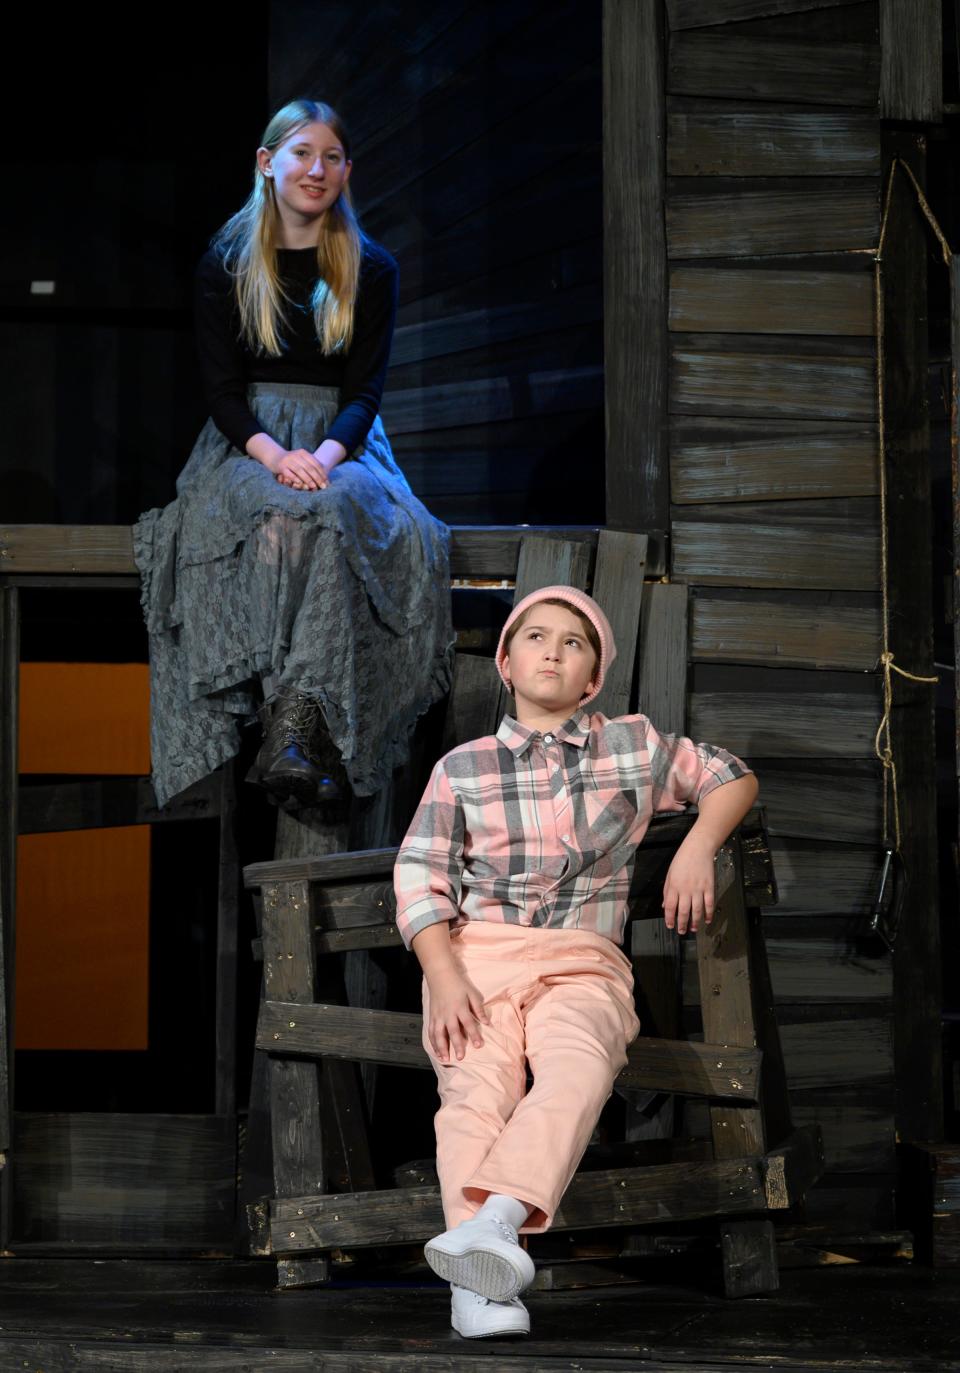 Ashley Greenamyer, top, as the wise spider Charlotte, and Lucas Howell as the tiny pig Wilbur in "Charlotte's Web" March 23-24 at the Oak Ridge Playhouse.